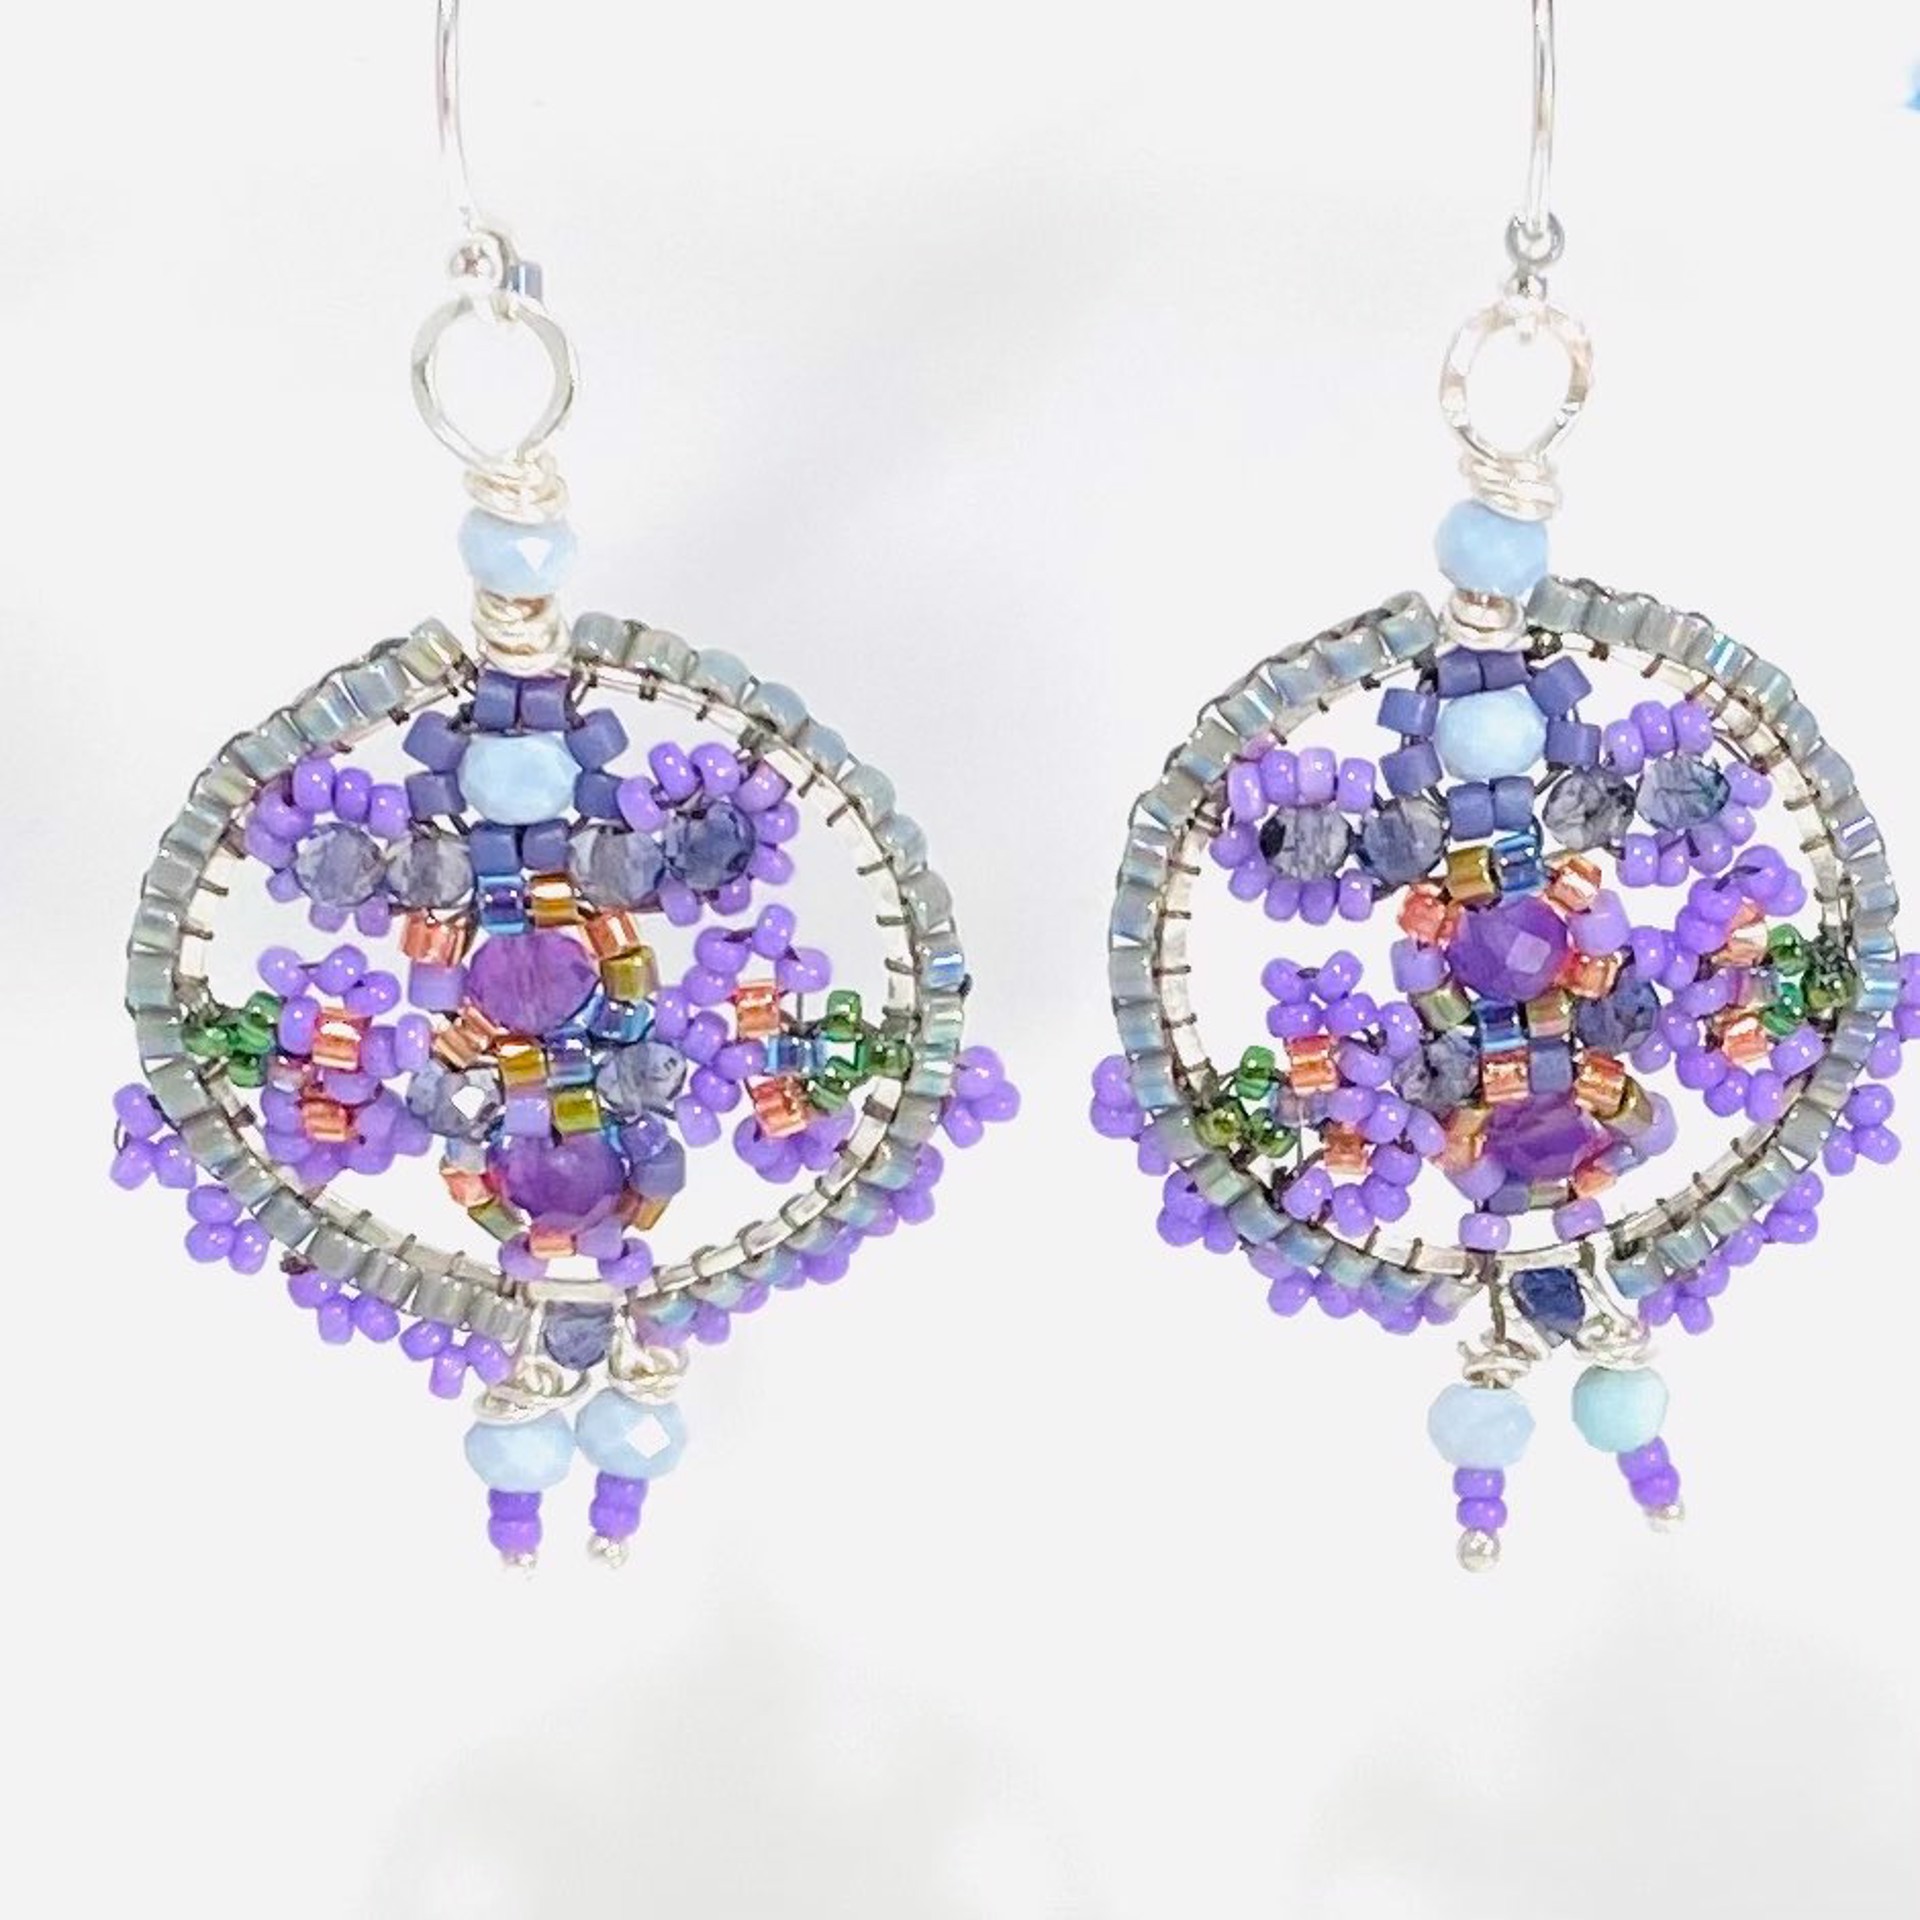 Amethyst and Opal Earrings BD22-12 by Barbara Duimstra